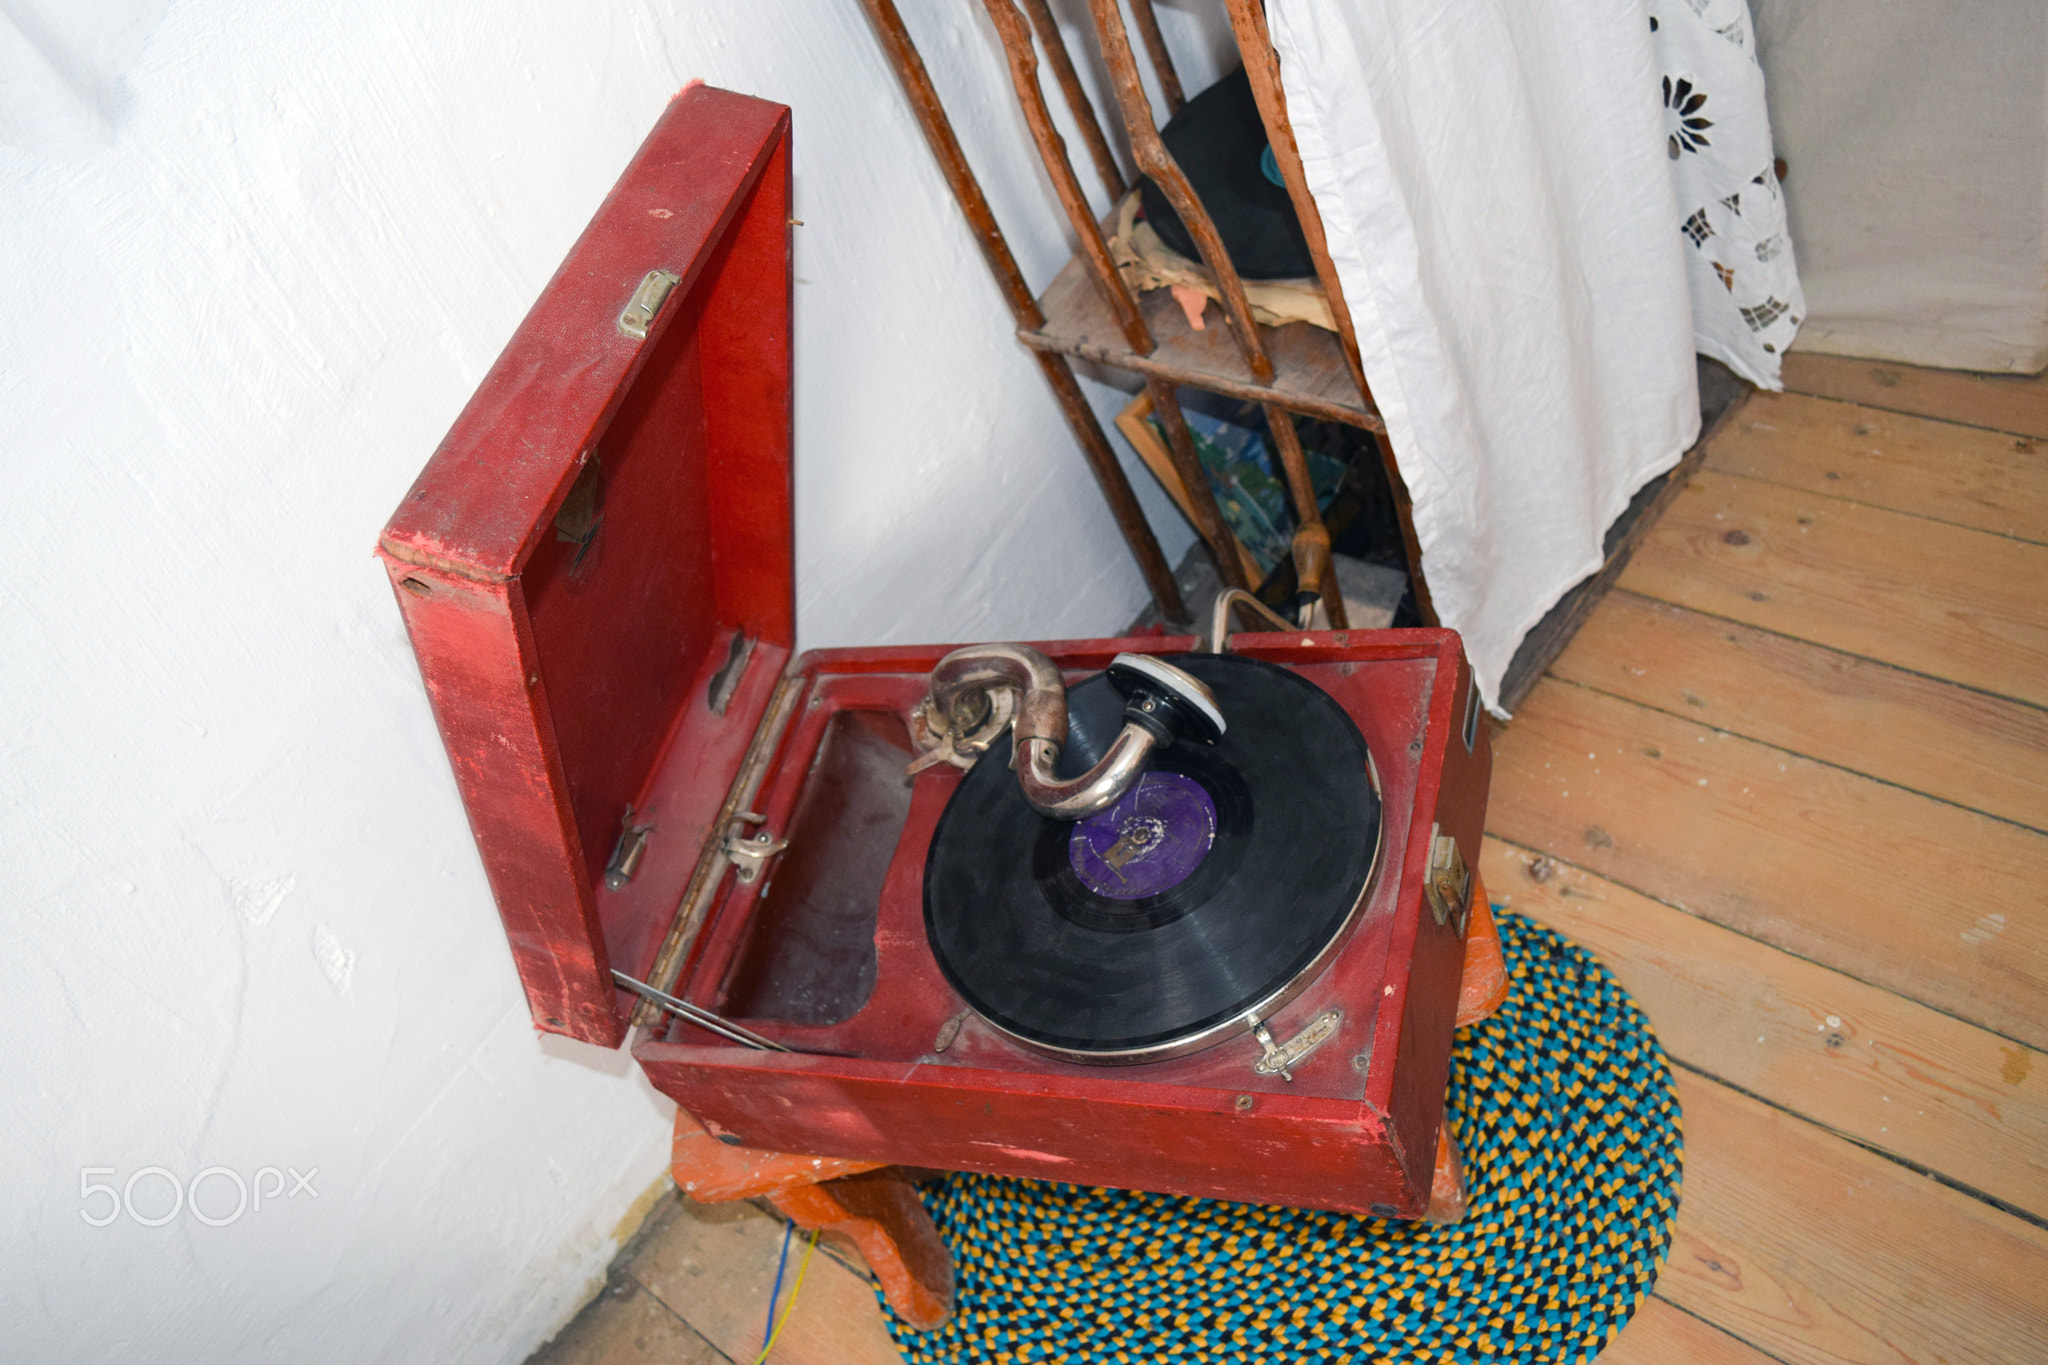 Ancient dusty record player